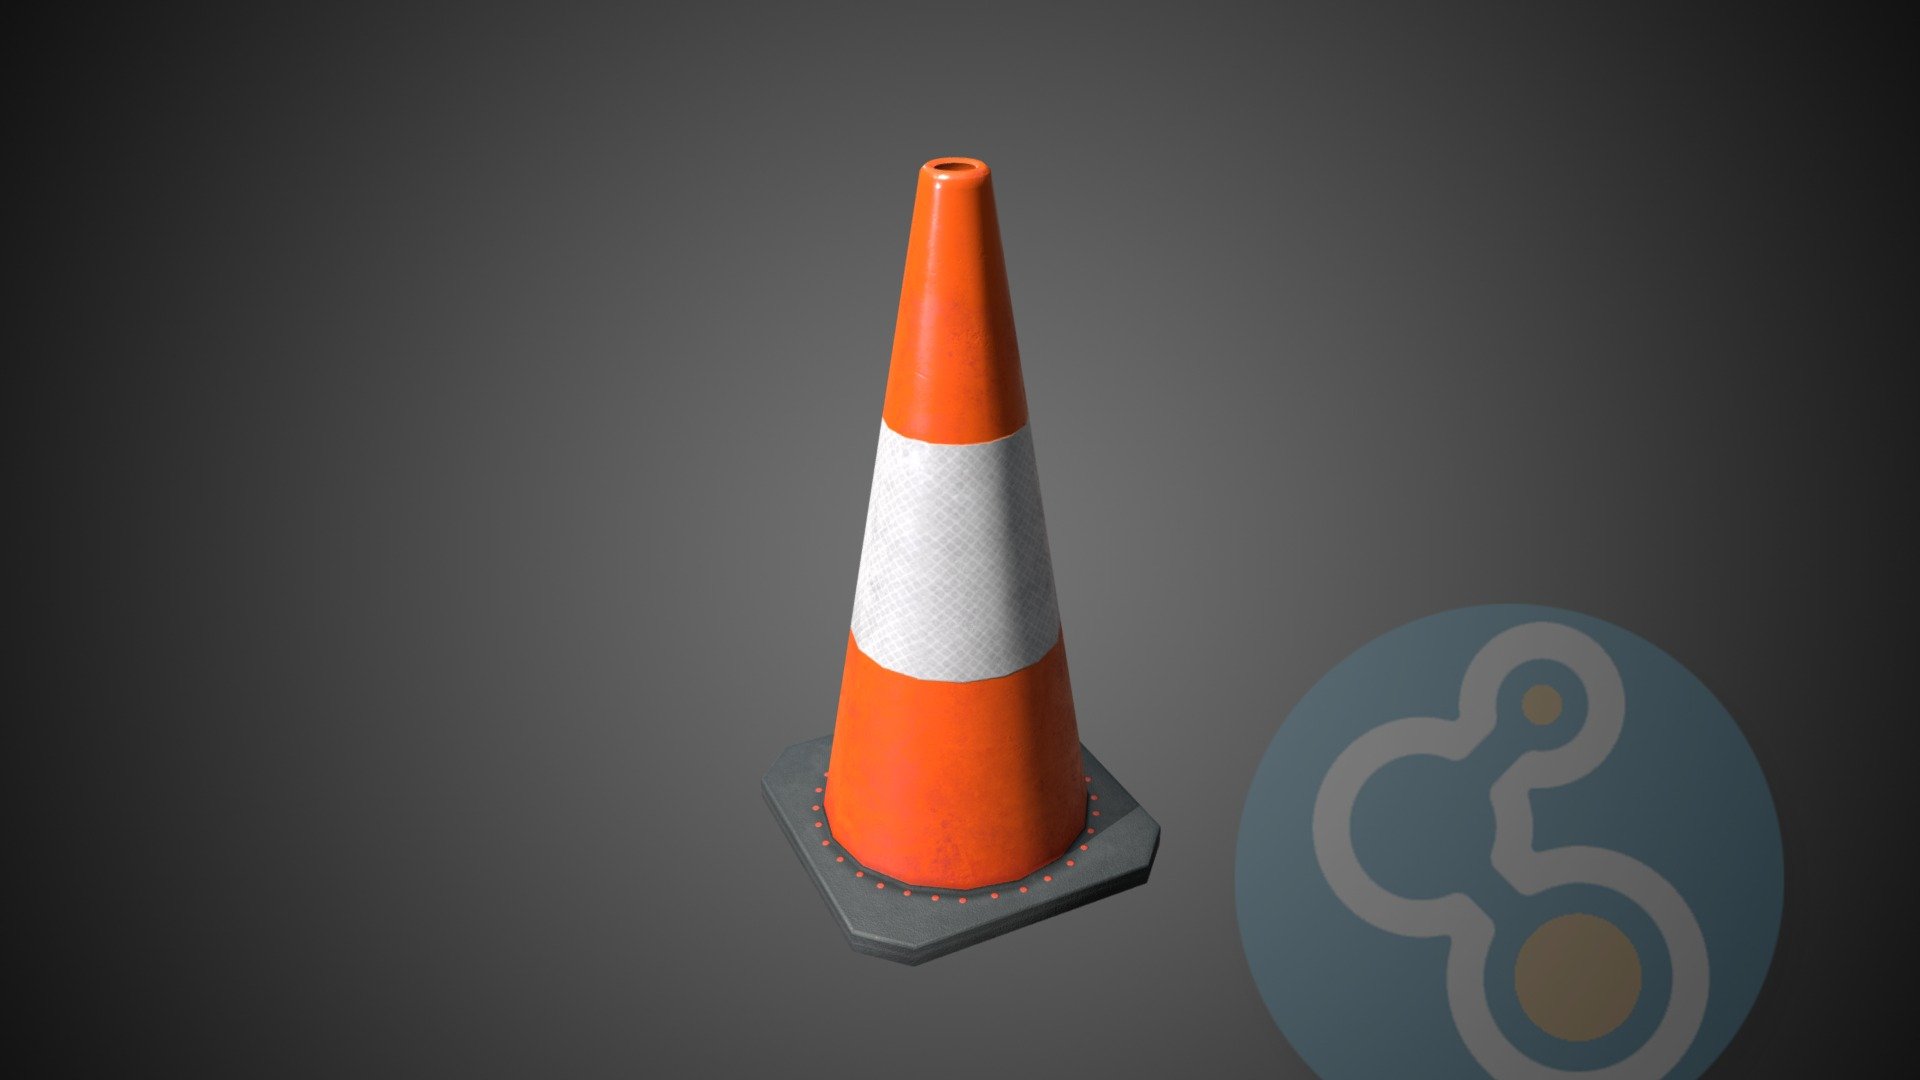 A medium-sized rubber traffic cone.

Low poly, ideal for game engines/VFX.

Includes a .blend, .fbx, and texture sets in PBR/UE4/Unity format at 2k 3d model